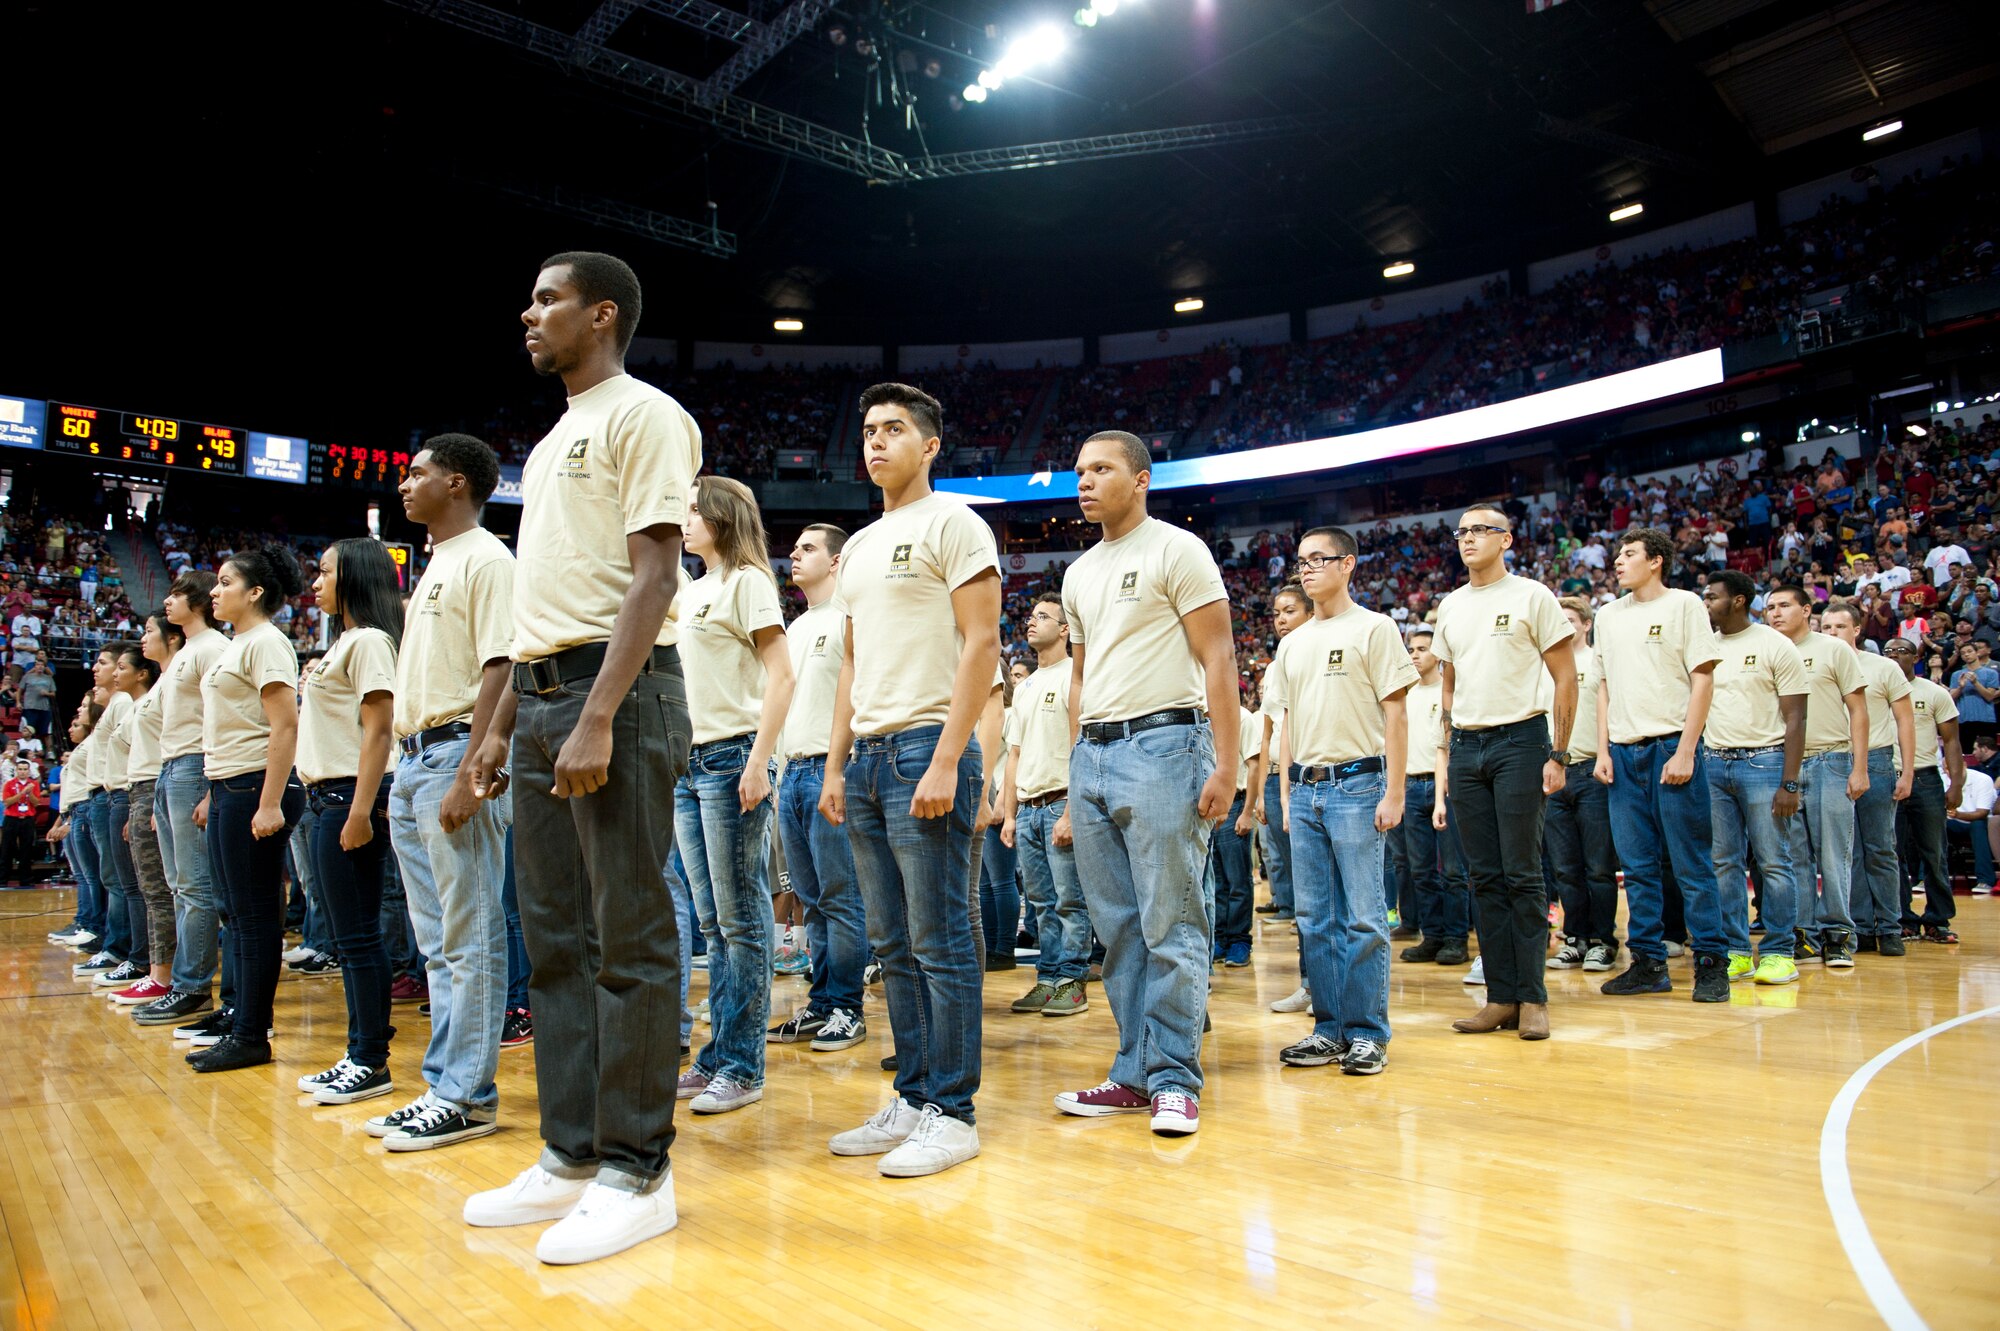 Individuals who were joining the U.S. Army wait on the court during halftime of a USA men’s national basketball team scrimmage at the Thomas and Mack Center in Las Vegas, August 1, 2014. These individuals were about the take the oath of enlistment. (U.S. Air Force photo by Airman 1st Class Thomas Spangler)